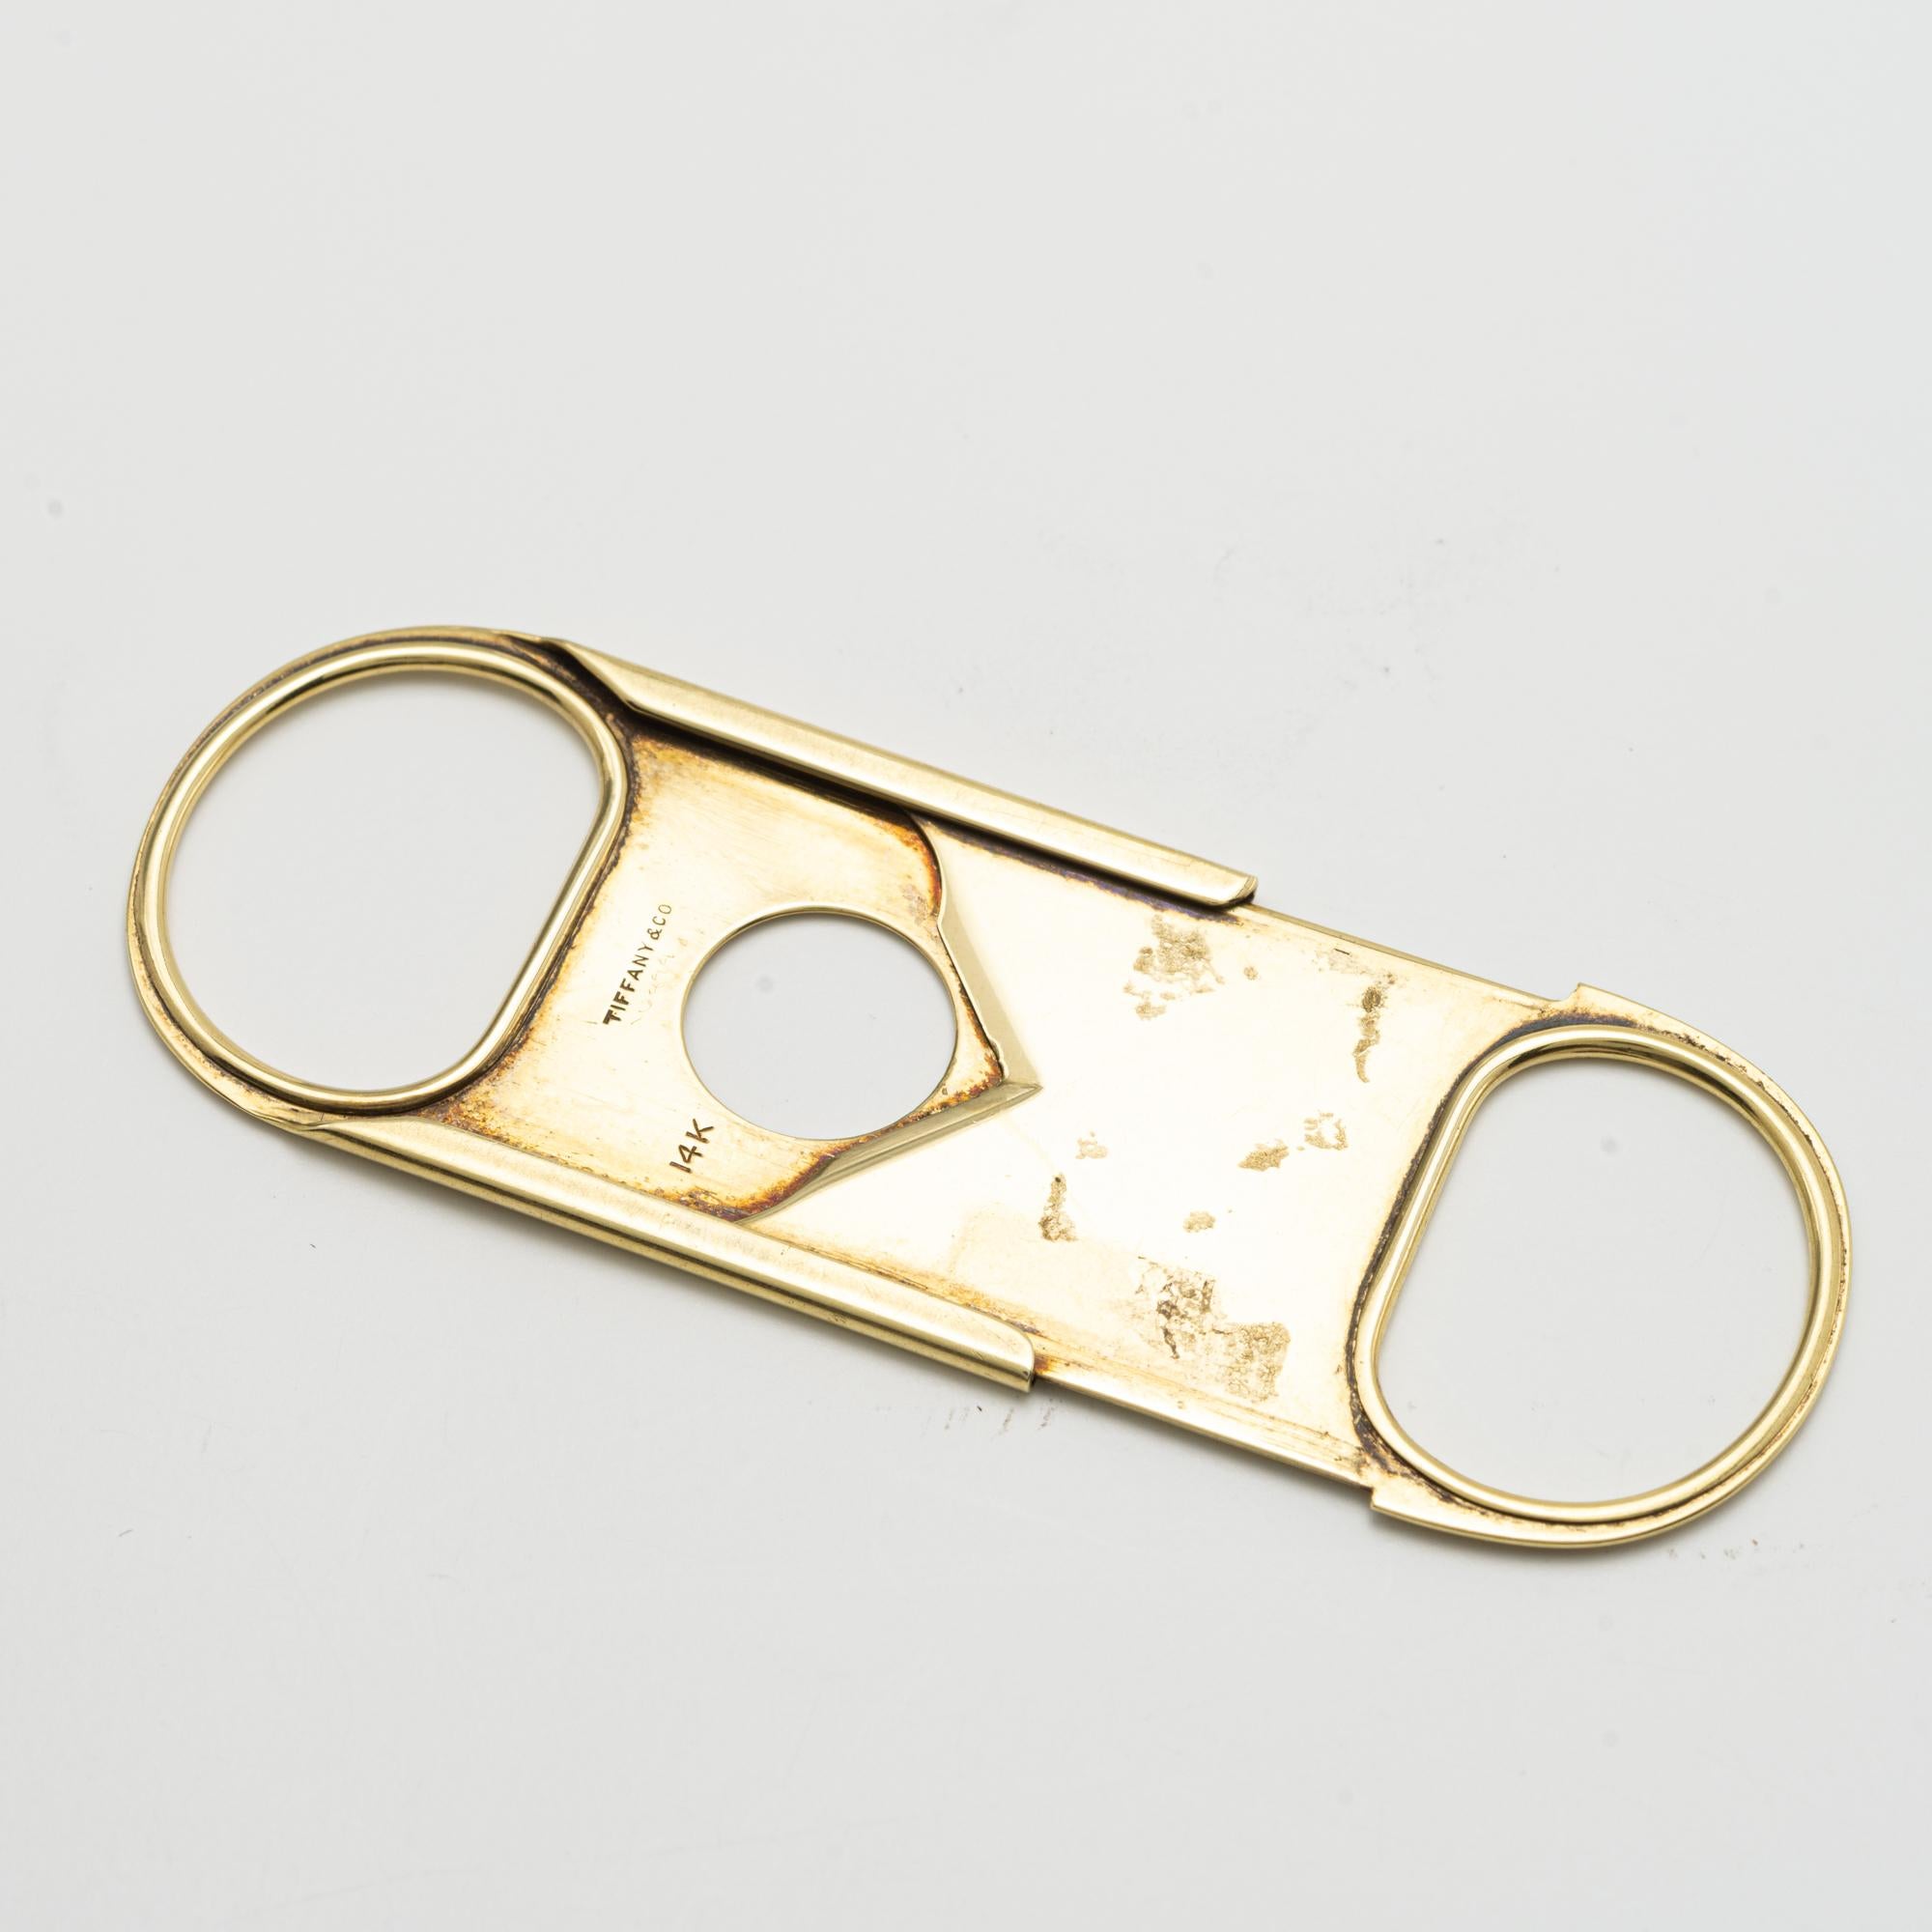 A Gold Cigar Cutter, by Tiffany & Co.
signed Tiffany & Co.
20TH CENTURY
Length 2 in. (5.08cm.) by Width 3/4 in. (1.9cm.)
